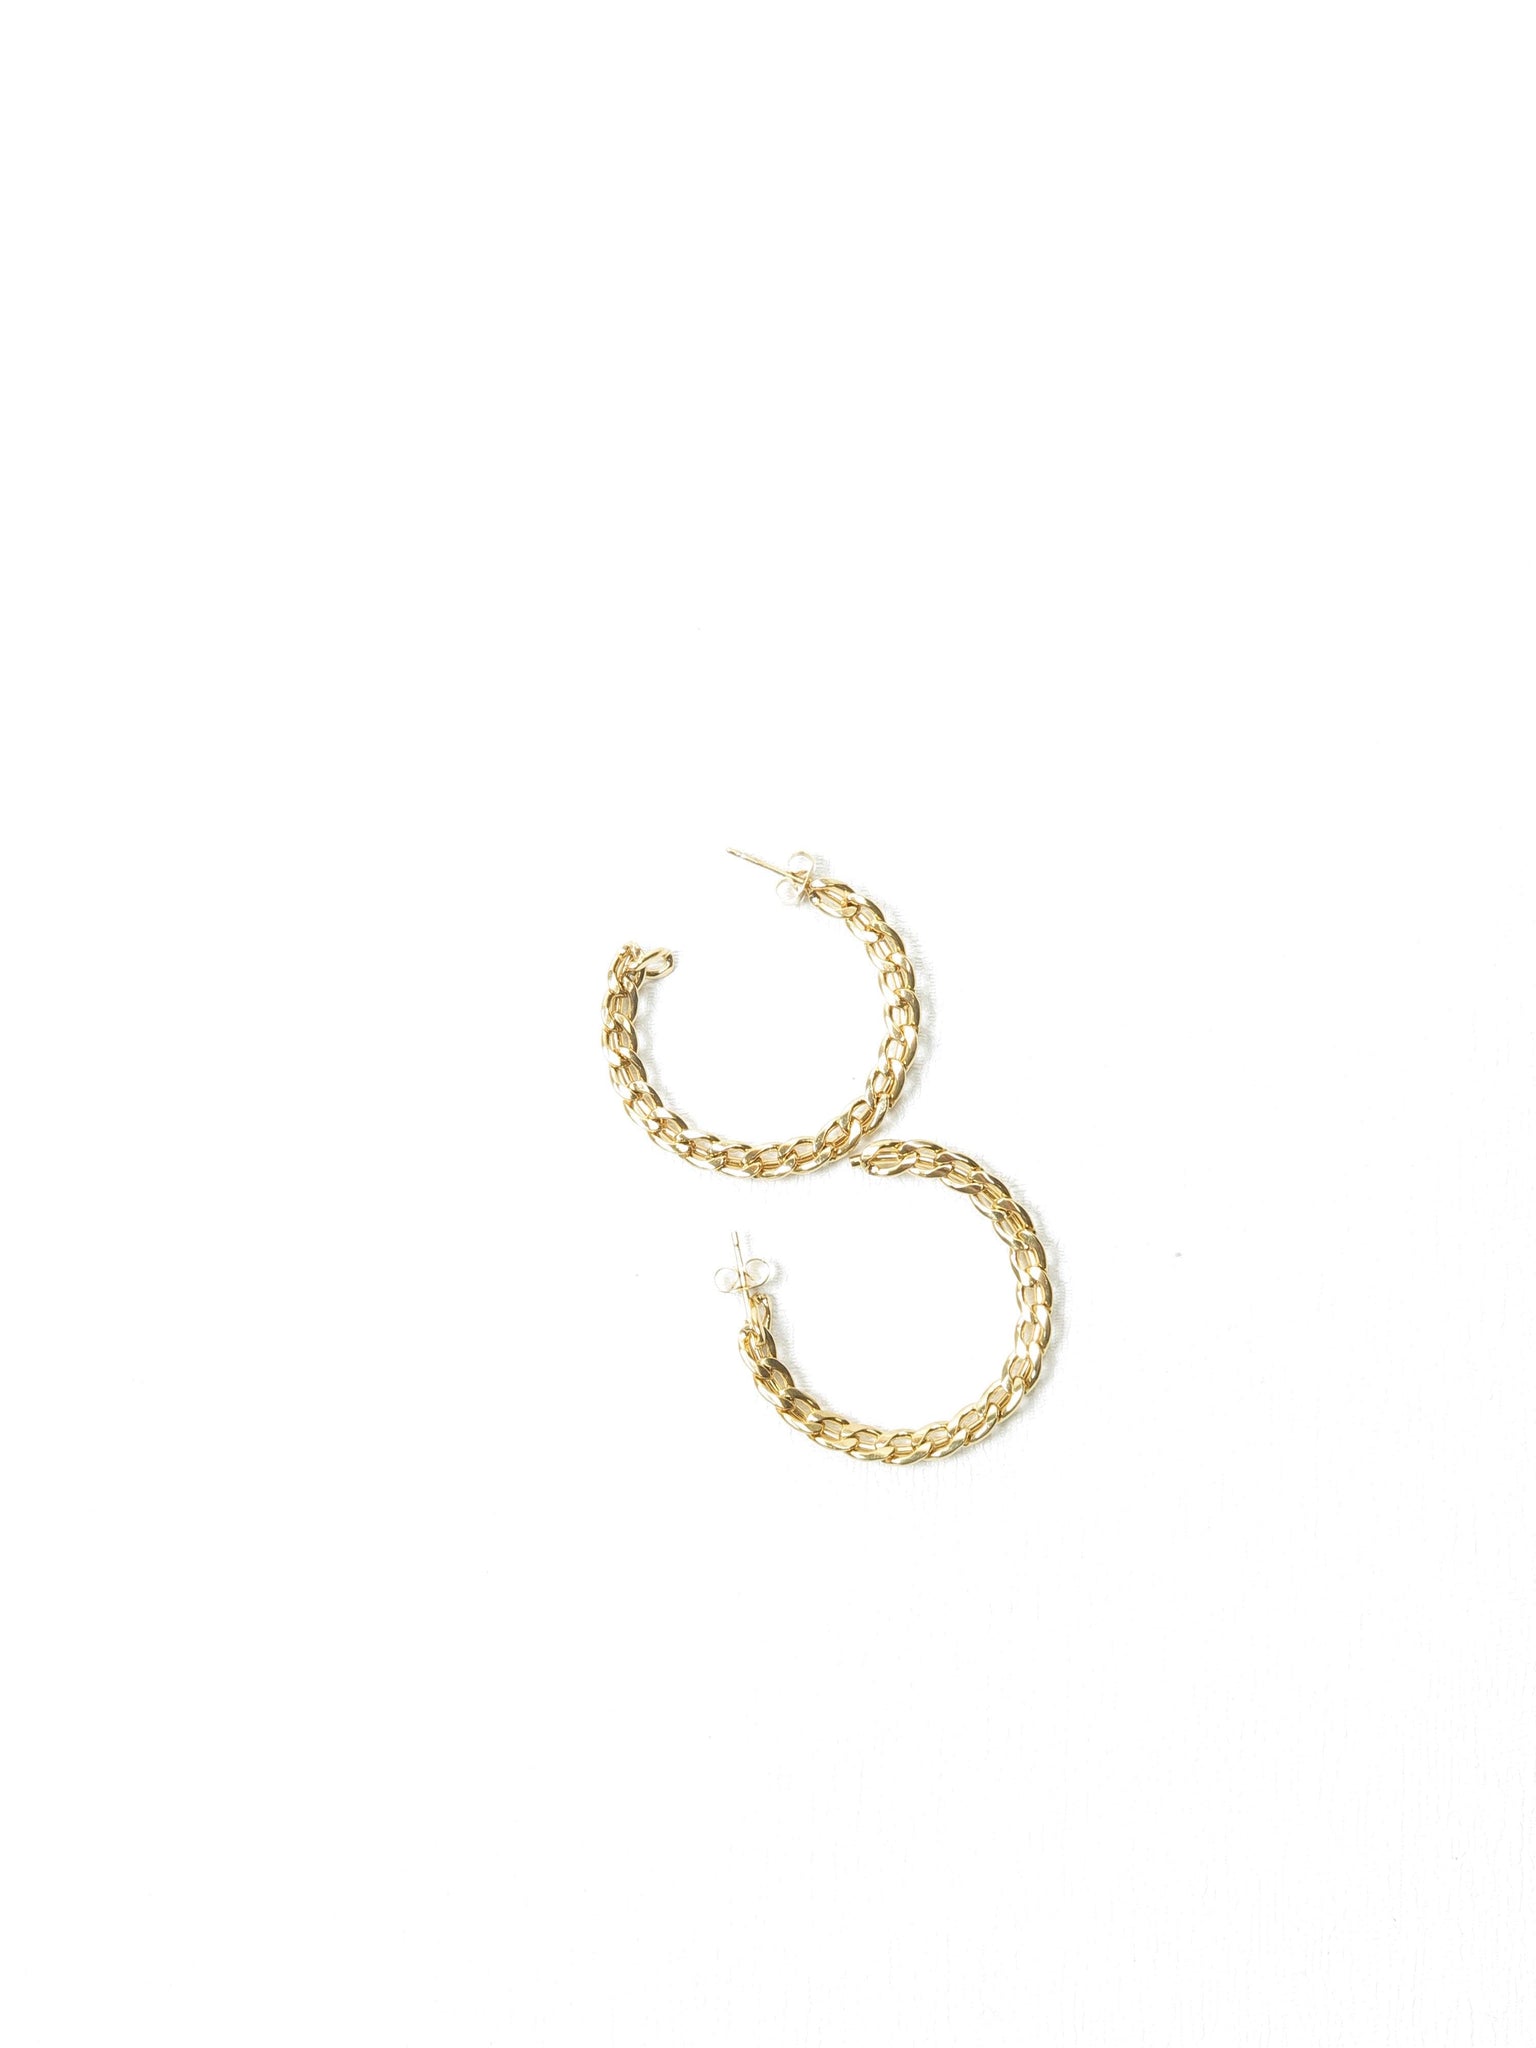 Gold Coloured Hoop Chain Style Earrings - The Harlequin